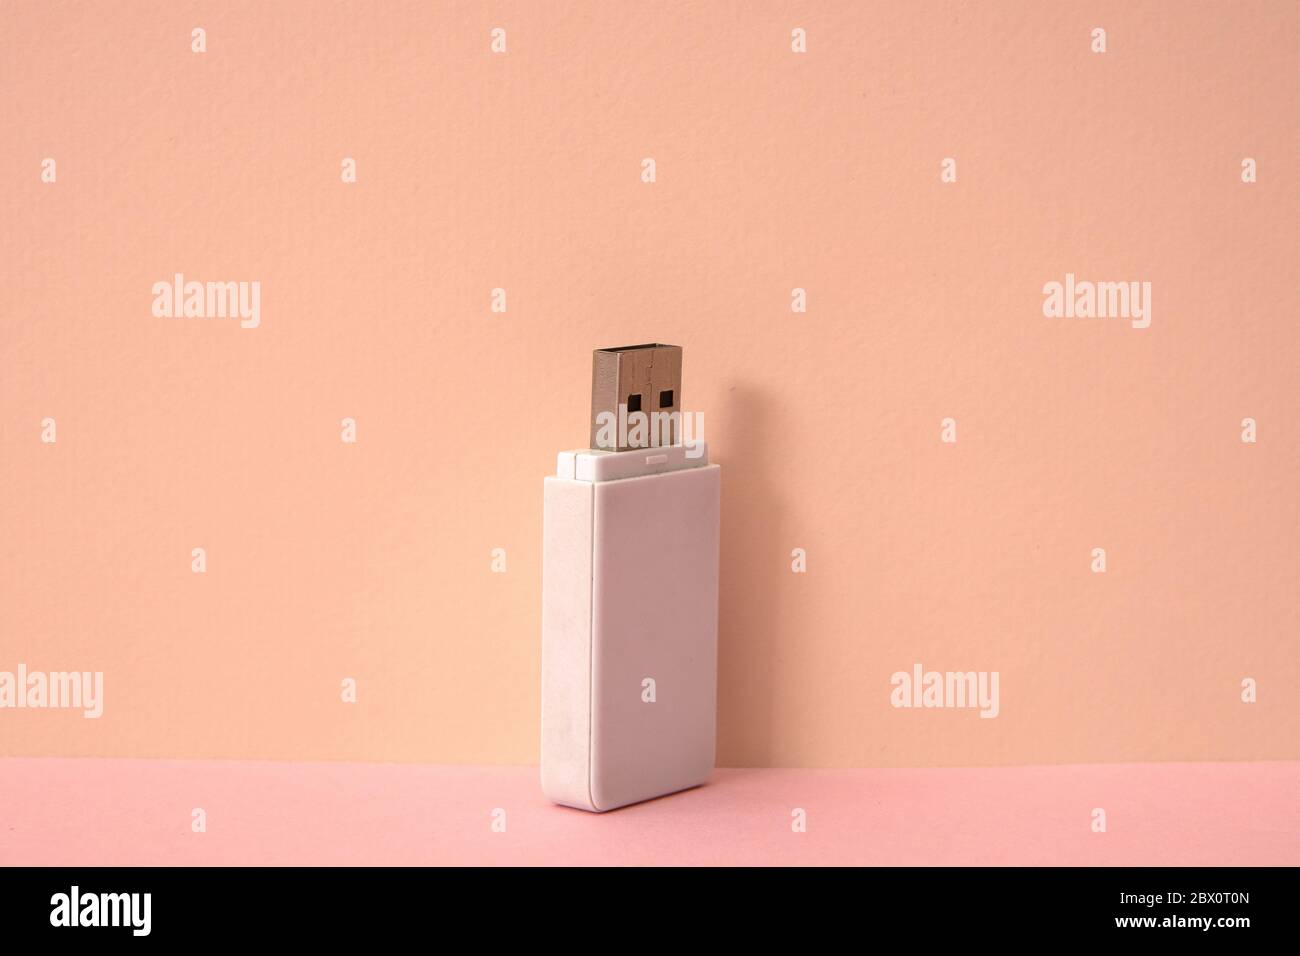 Pink color background and white USB memory storage. Stock Photo